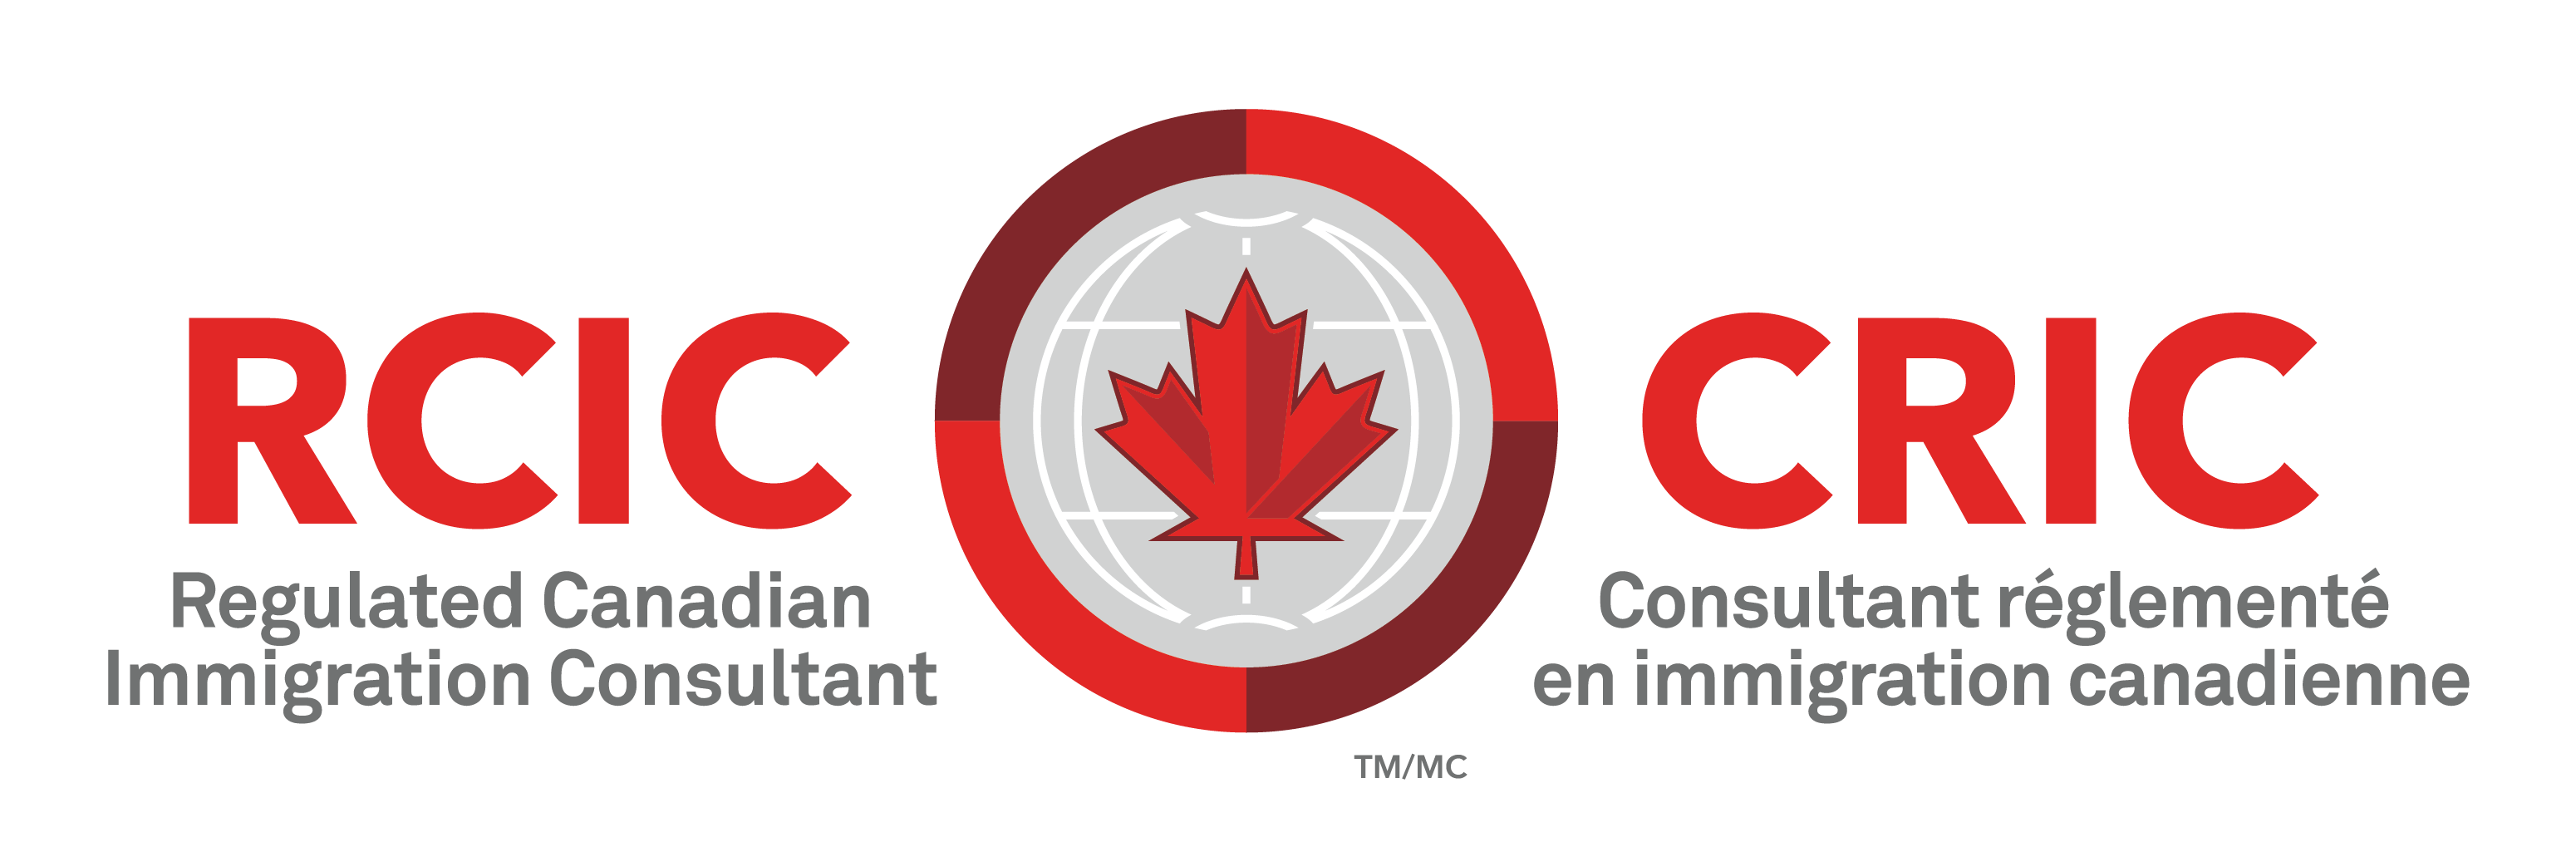 What is a Regulated Canadian Immigration Consultant (RCIC)